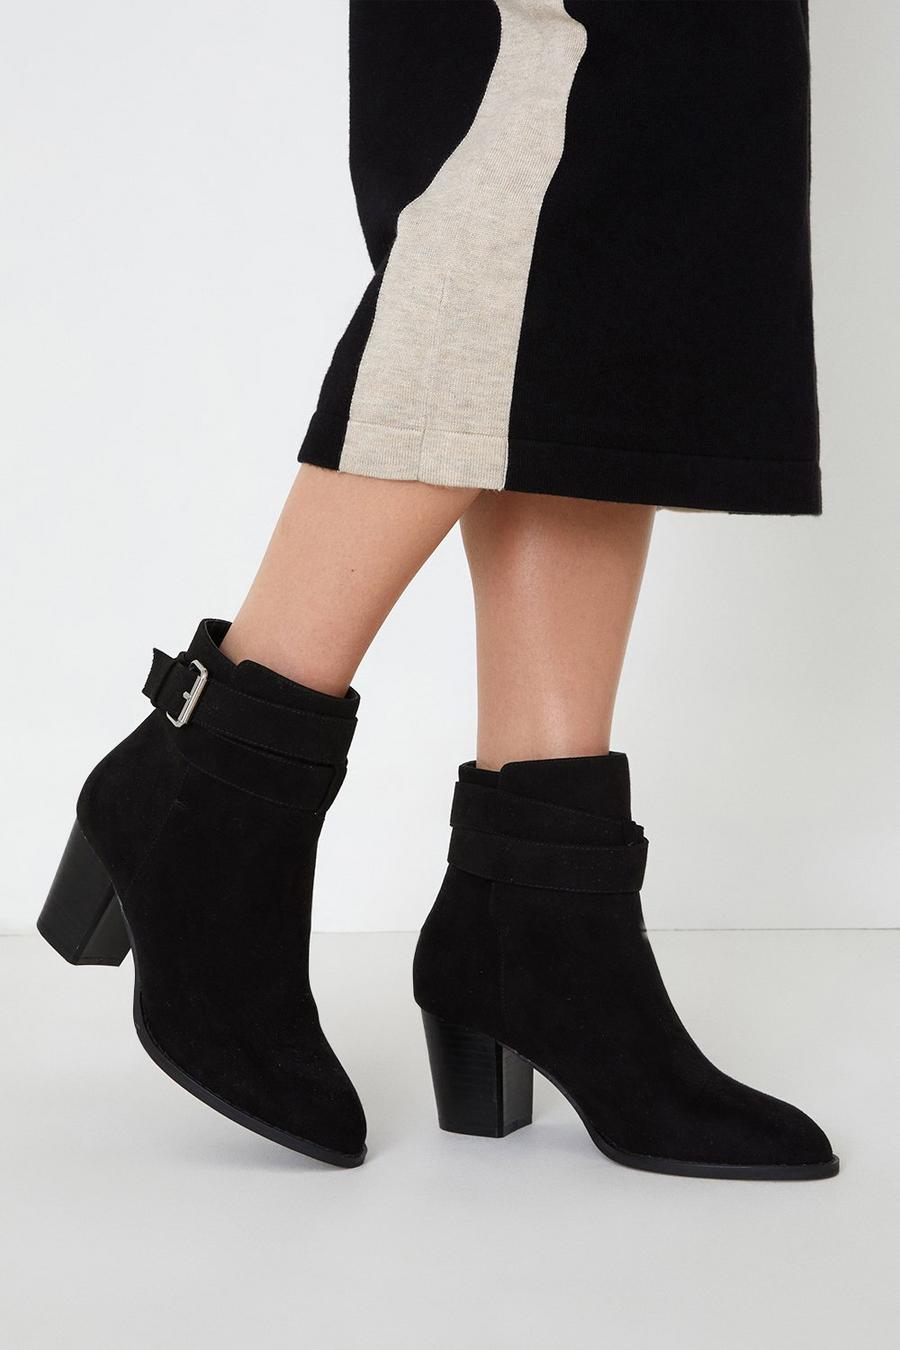 Autumn Cross Strapped Heeled Ankle Boots